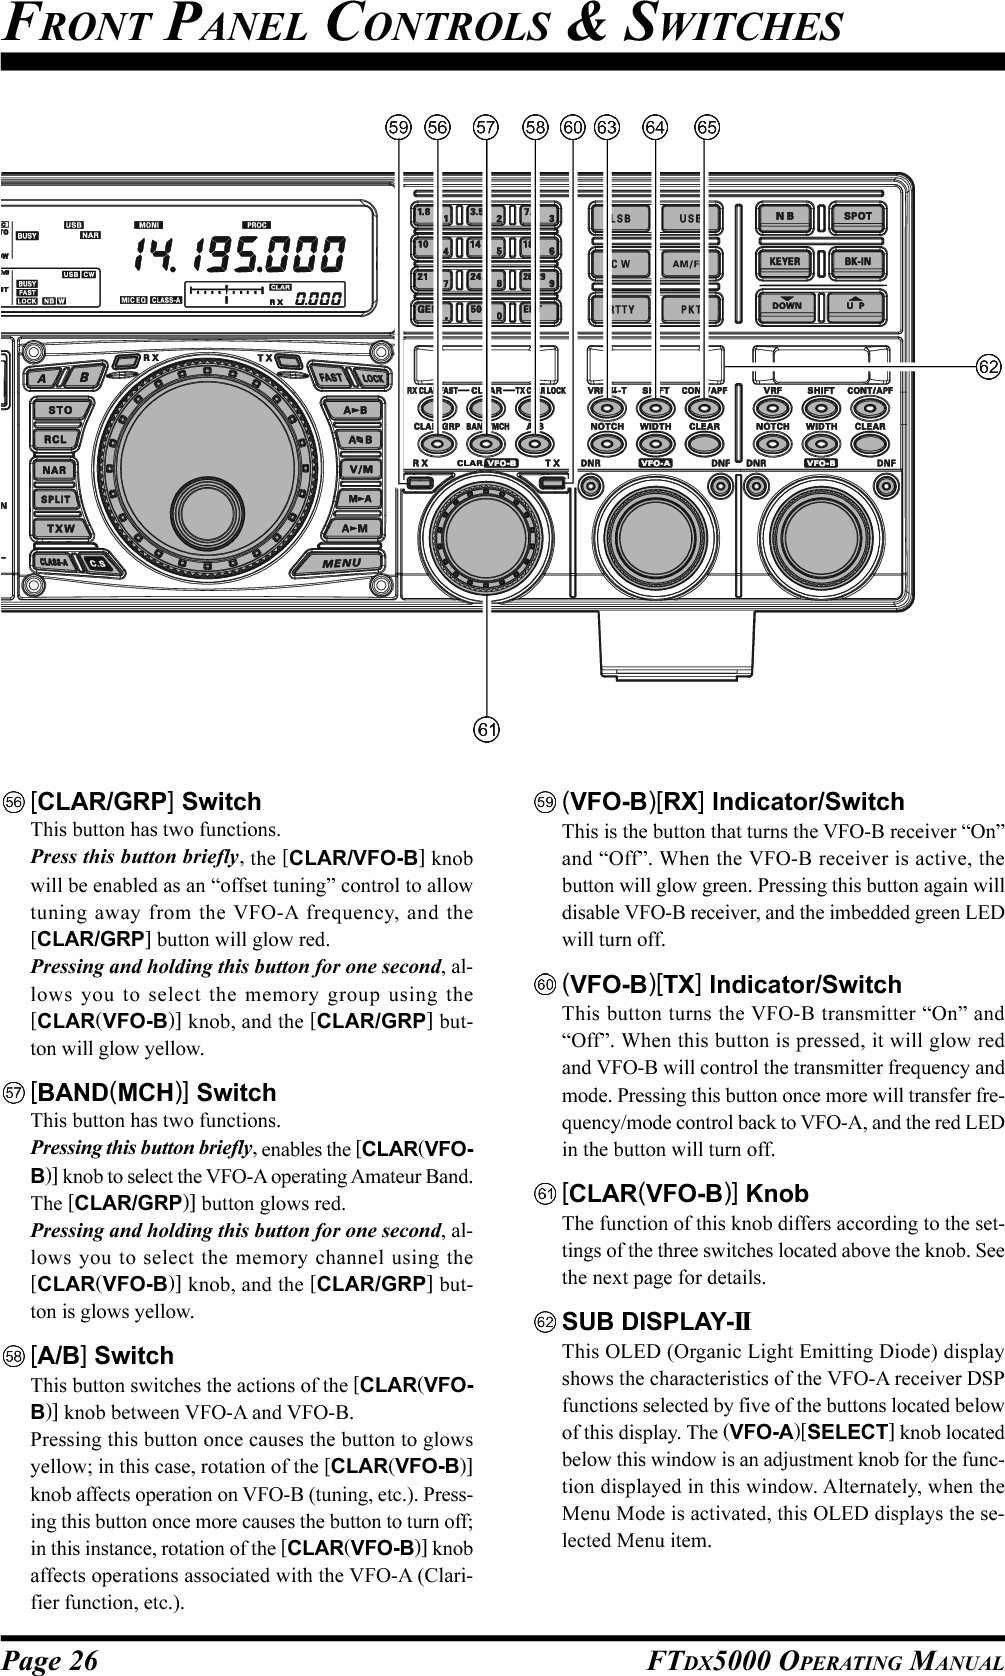 Page 26 FTDX5000 OPERATING MANUAL[CLAR/GRP] SwitchThis button has two functions.Press this button briefly, the [CLAR/VFO-B] knobwill be enabled as an “offset tuning” control to allowtuning away from the VFO-A frequency, and the[CLAR/GRP] button will glow red.Pressing and holding this button for one second, al-lows you to select the memory group using the[CLAR(VFO-B)] knob, and the [CLAR/GRP] but-ton will glow yellow.[BAND(MCH)] SwitchThis button has two functions.Pressing this button briefly, enables the [CLAR(VFO-B)] knob to select the VFO-A operating Amateur Band.The [CLAR/GRP)] button glows red.Pressing and holding this button for one second, al-lows you to select the memory channel using the[CLAR(VFO-B)] knob, and the [CLAR/GRP] but-ton is glows yellow.[A/B] SwitchThis button switches the actions of the [CLAR(VFO-B)] knob between VFO-A and VFO-B.Pressing this button once causes the button to glowsyellow; in this case, rotation of the [CLAR(VFO-B)]knob affects operation on VFO-B (tuning, etc.). Press-ing this button once more causes the button to turn off;in this instance, rotation of the [CLAR(VFO-B)] knobaffects operations associated with the VFO-A (Clari-fier function, etc.).(VFO-B)[RX] Indicator/SwitchThis is the button that turns the VFO-B receiver “On”and “Off”. When the VFO-B receiver is active, thebutton will glow green. Pressing this button again willdisable VFO-B receiver, and the imbedded green LEDwill turn off.(VFO-B)[TX] Indicator/SwitchThis button turns the VFO-B transmitter “On” and“Off”. When this button is pressed, it will glow redand VFO-B will control the transmitter frequency andmode. Pressing this button once more will transfer fre-quency/mode control back to VFO-A, and the red LEDin the button will turn off.[CLAR(VFO-B)] KnobThe function of this knob differs according to the set-tings of the three switches located above the knob. Seethe next page for details.SUB DISPLAY-IIThis OLED (Organic Light Emitting Diode) displayshows the characteristics of the VFO-A receiver DSPfunctions selected by five of the buttons located belowof this display. The (VFO-A)[SELECT] knob locatedbelow this window is an adjustment knob for the func-tion displayed in this window. Alternately, when theMenu Mode is activated, this OLED displays the se-lected Menu item.FRONT PANEL CONTROLS &amp; SWITCHES